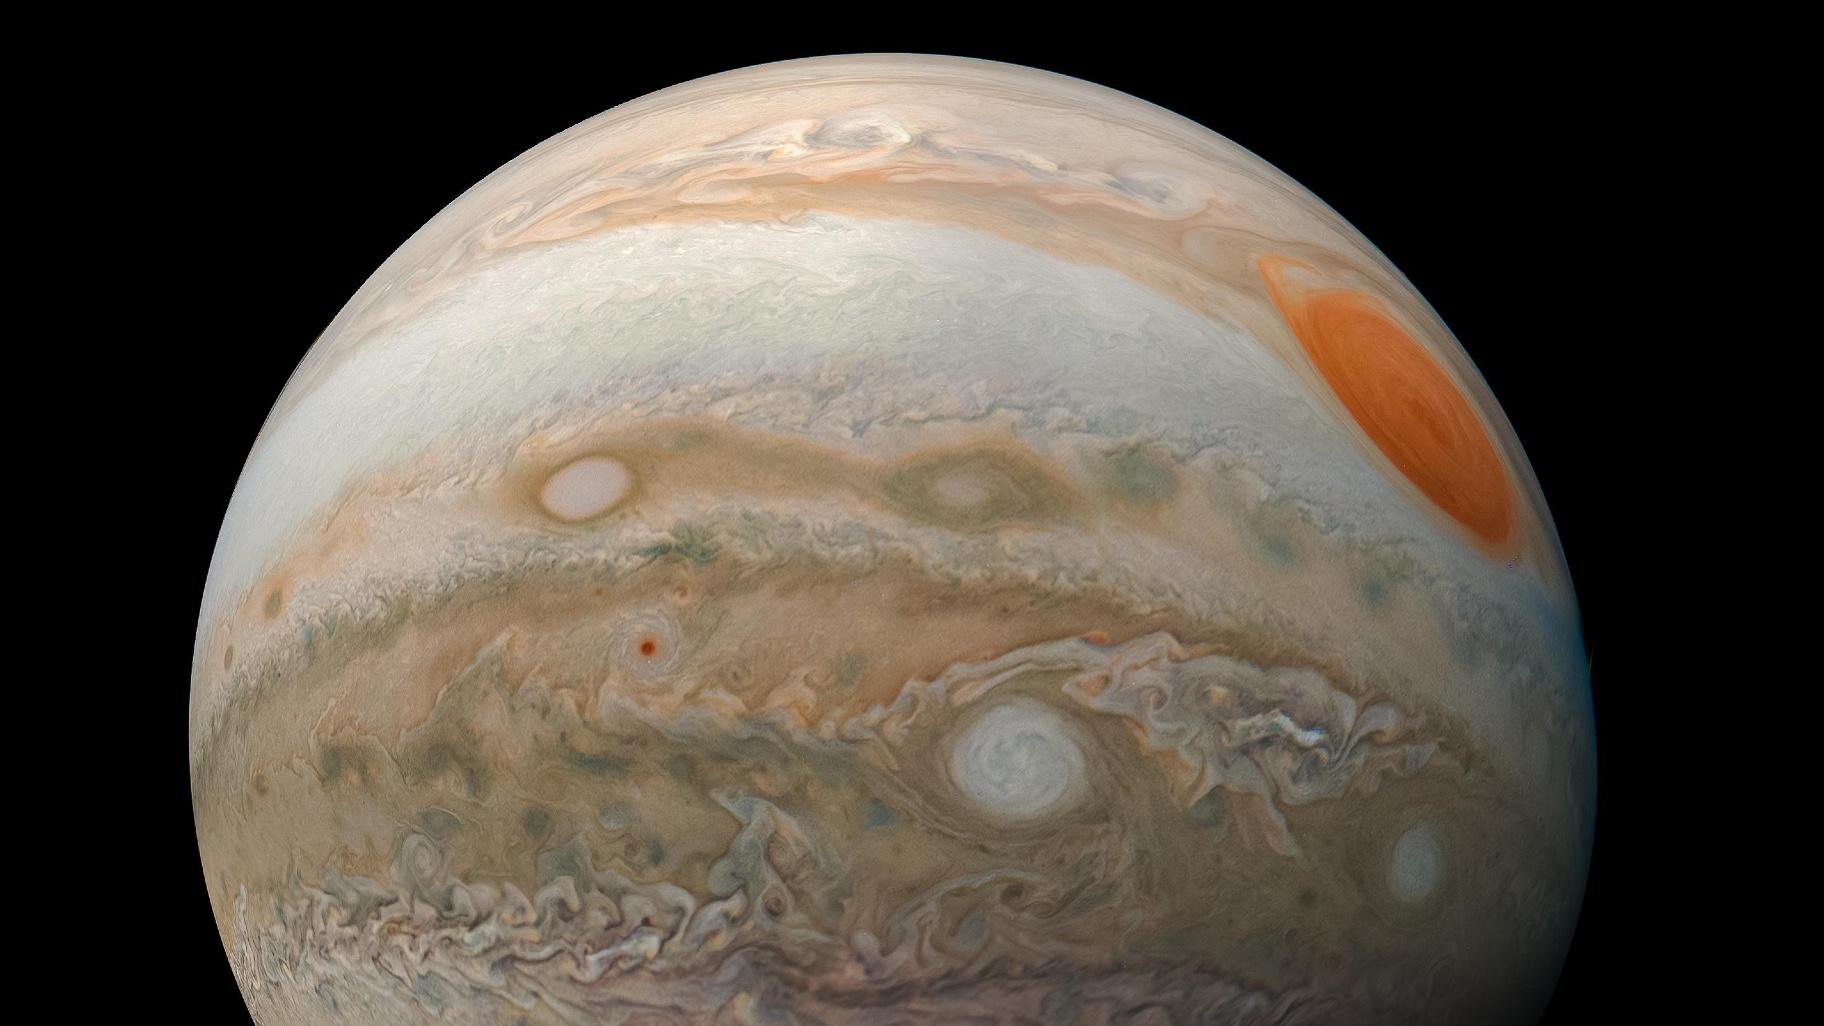 This view of Jupiter was captured by NASA’s Juno spacecraft on Feb. 12, 2019, as the spacecraft performed its 17th science pass of Jupiter. (Courtesy of NASA / JPL-Caltech / SwRI / MSSS)